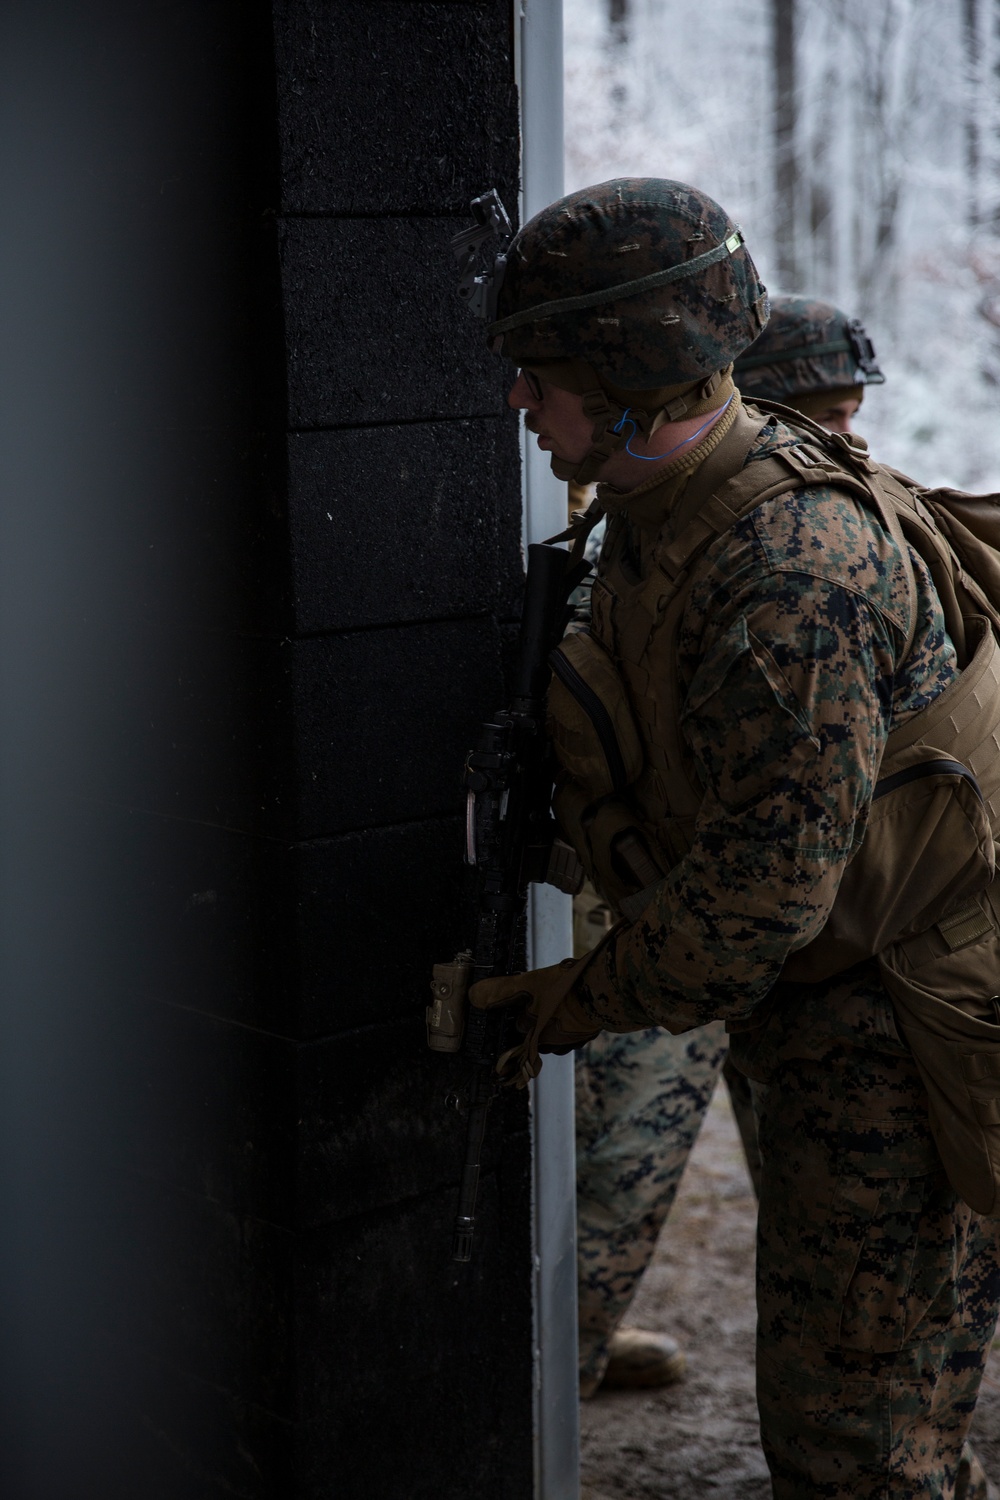 2nd Battalion, 8th Marine Regiment house clearing exercise